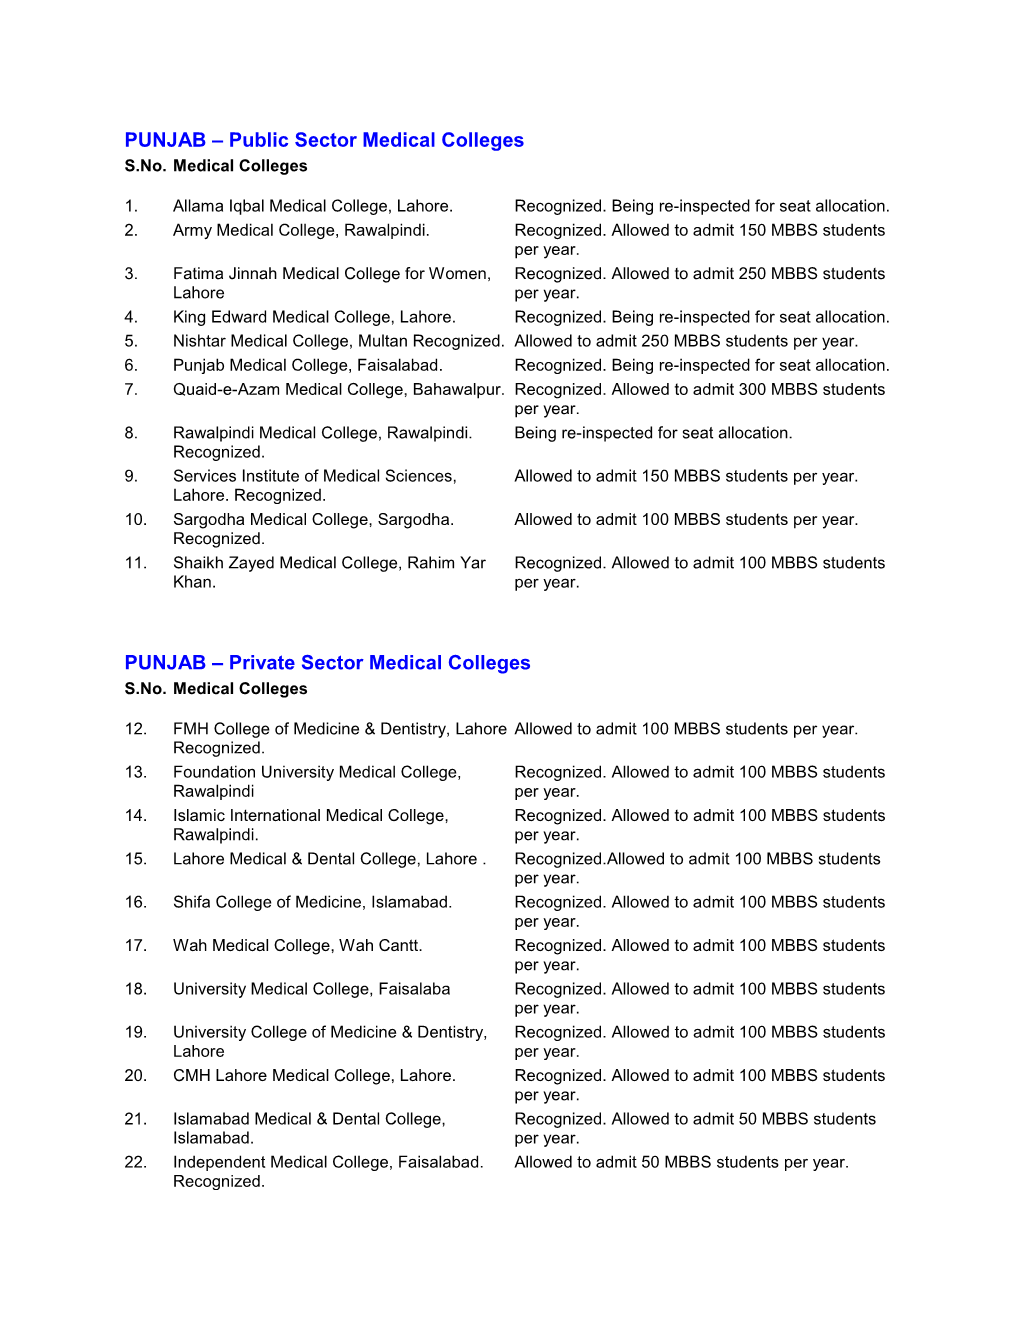 PUNJAB – Public Sector Medical Colleges PUNJAB – Private Sector